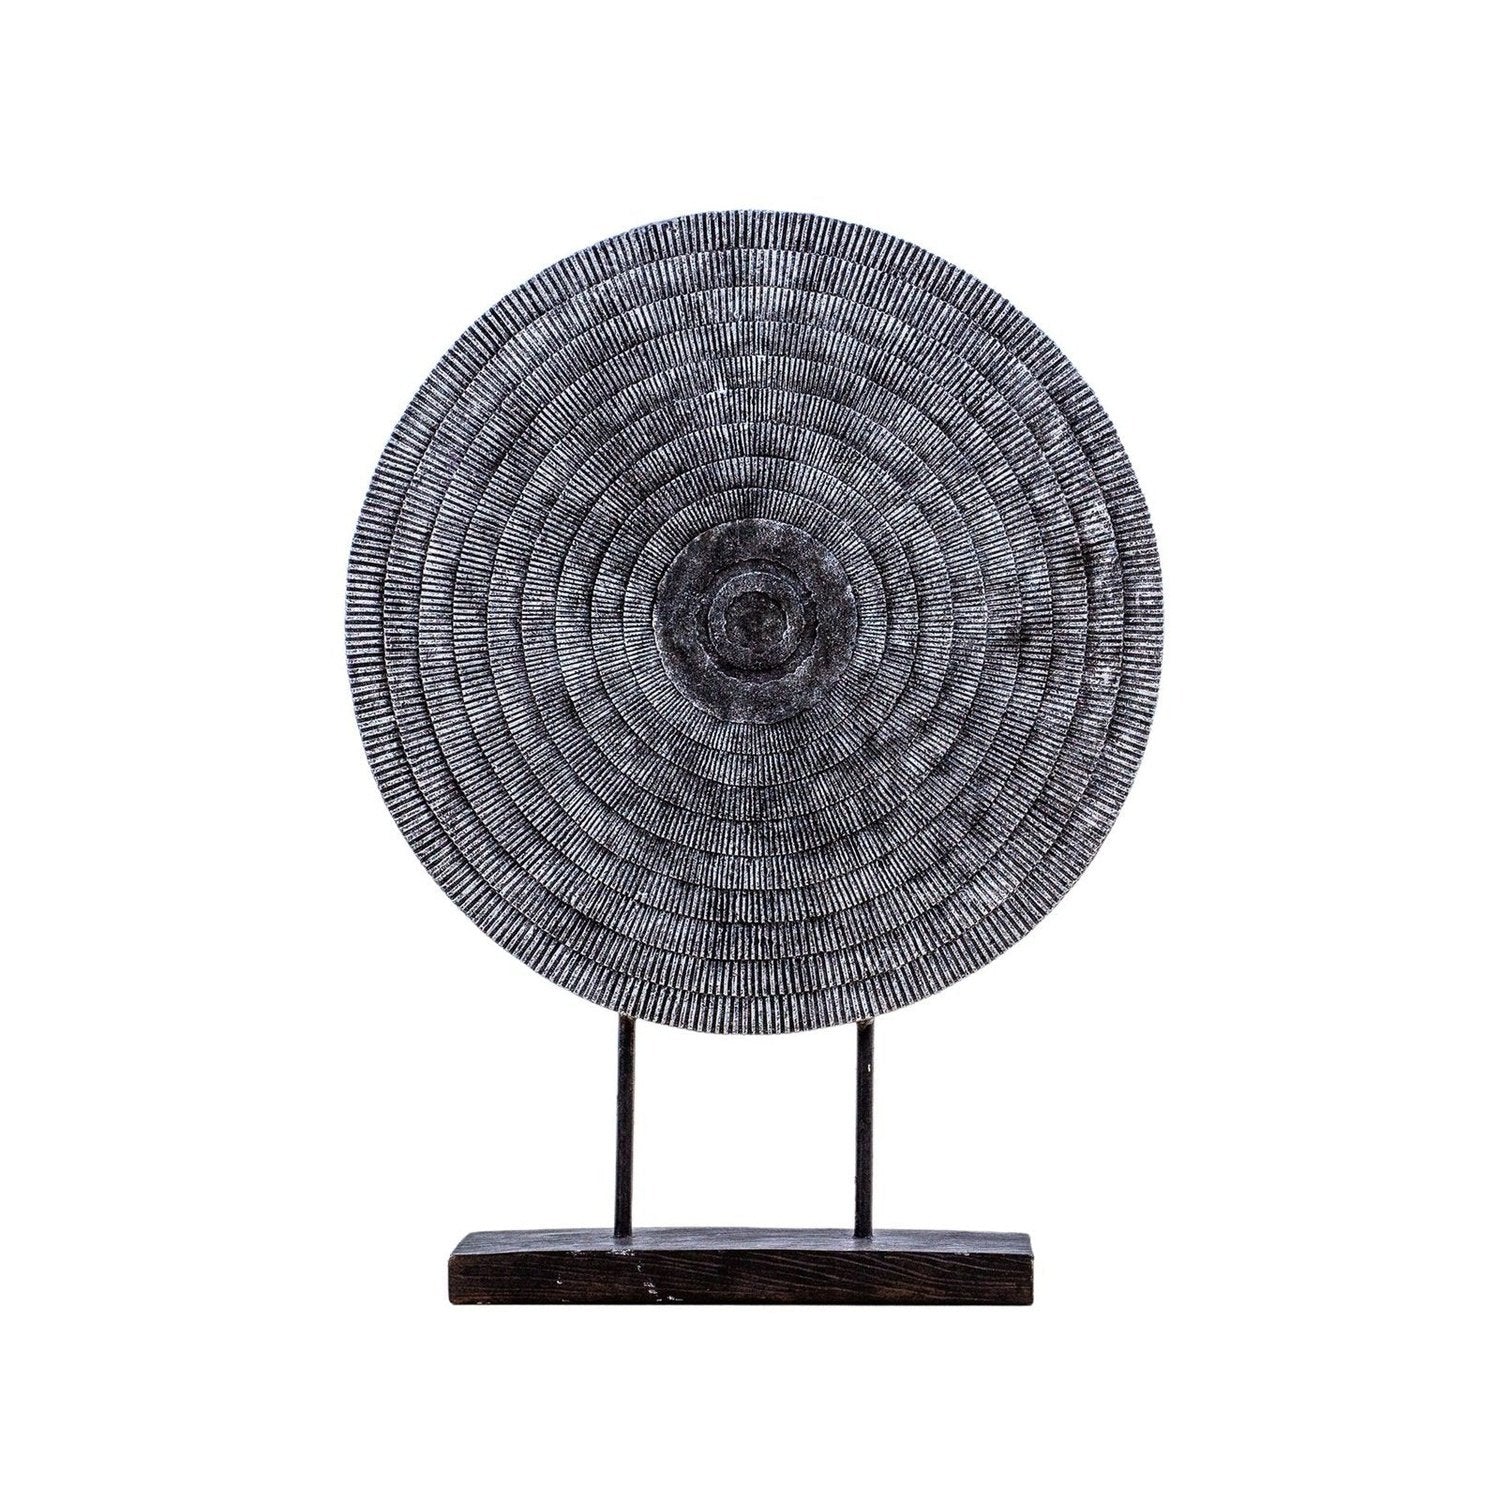 Xerax Disc on Stand - Handcrafted - Aztec Inspired Design - Dark Grey Wood Effect Stand